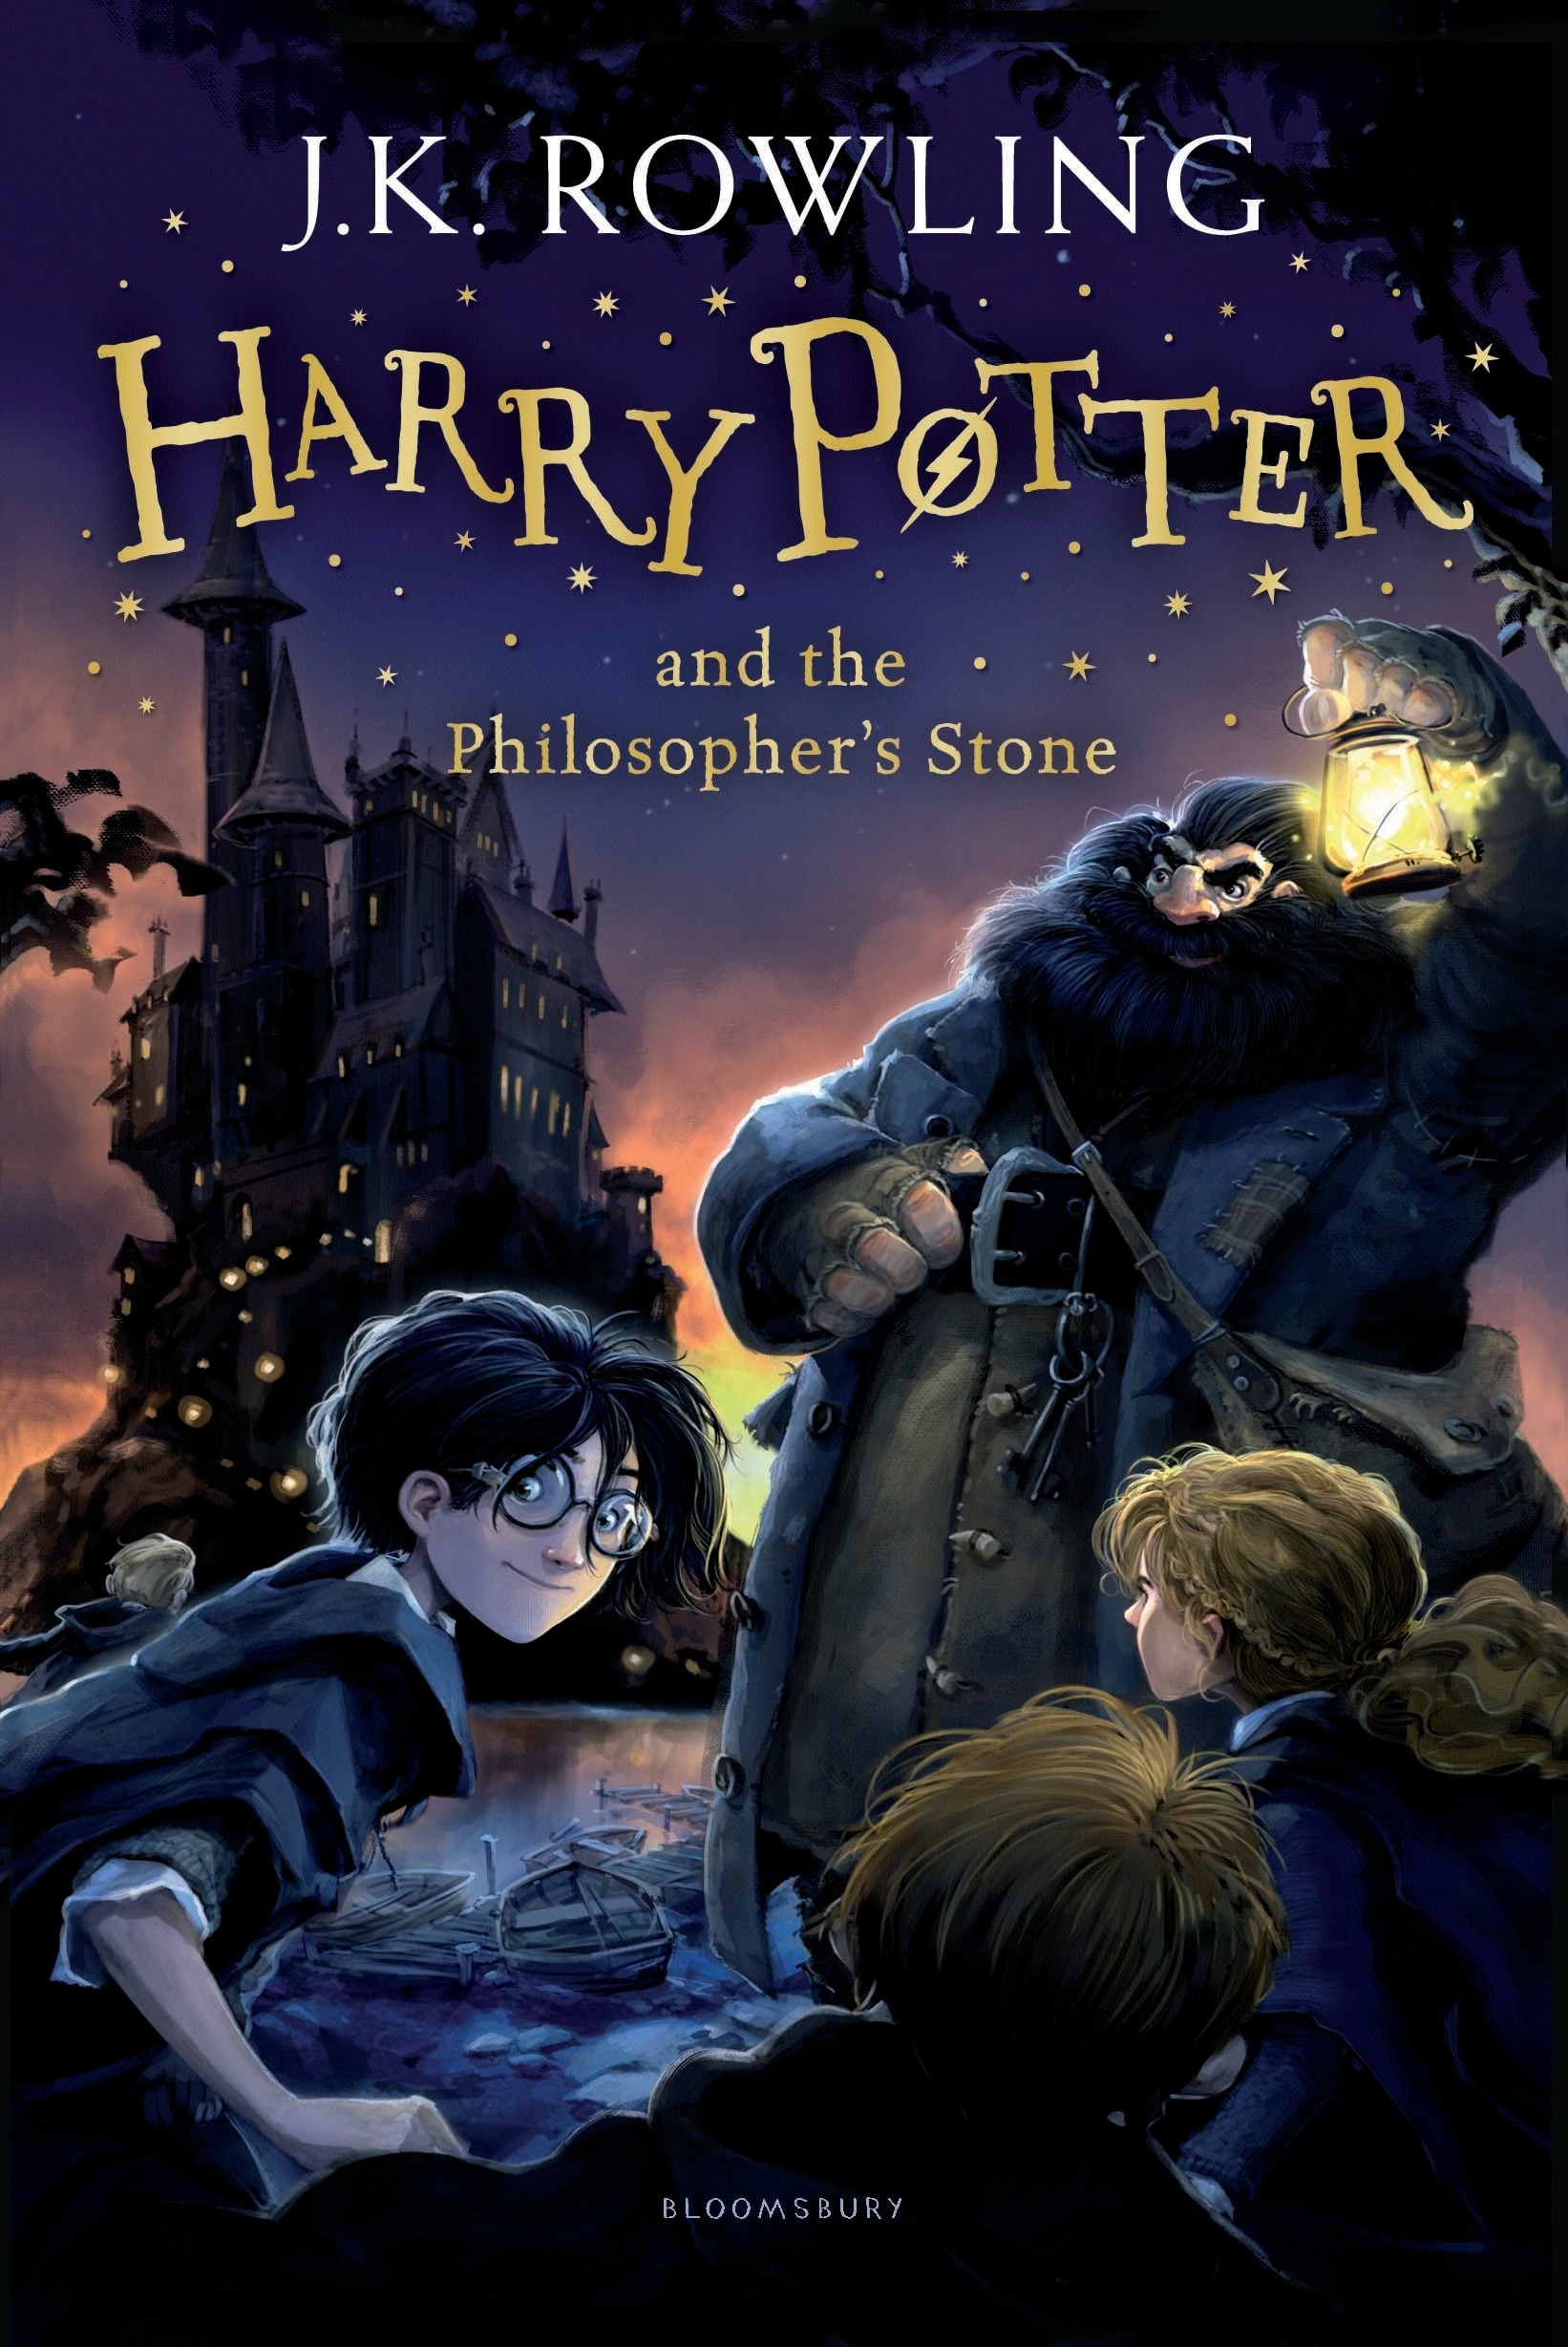 Book “Harry Potter and the Philosopher's Stone” by J.K. Rowling